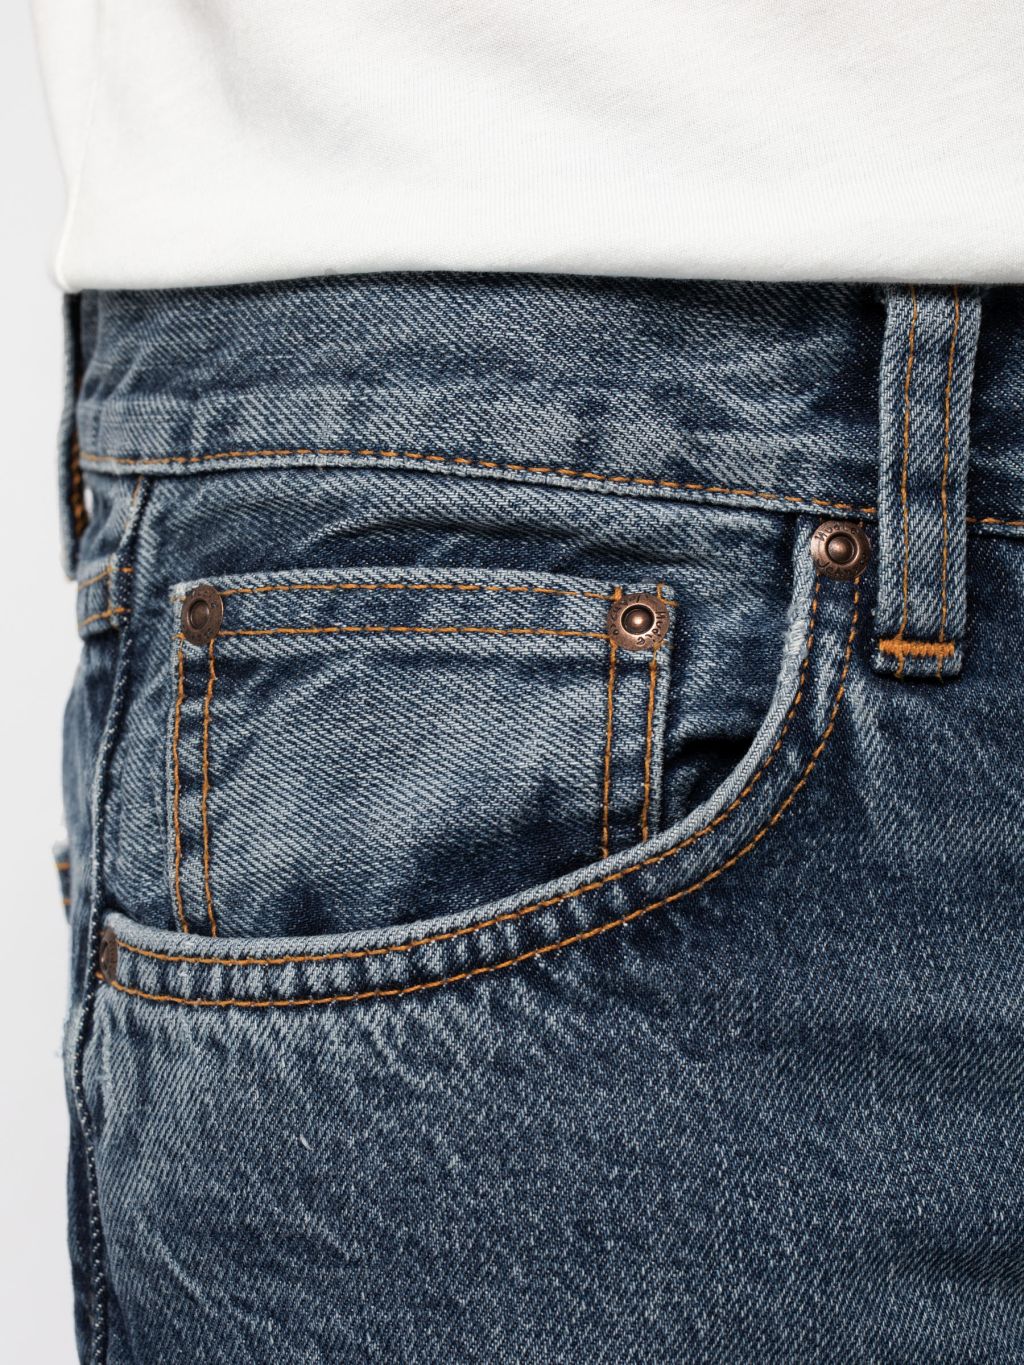 Gritty Jackson Jeans - Bio-Baumwolle-Mix Far Out 33/34